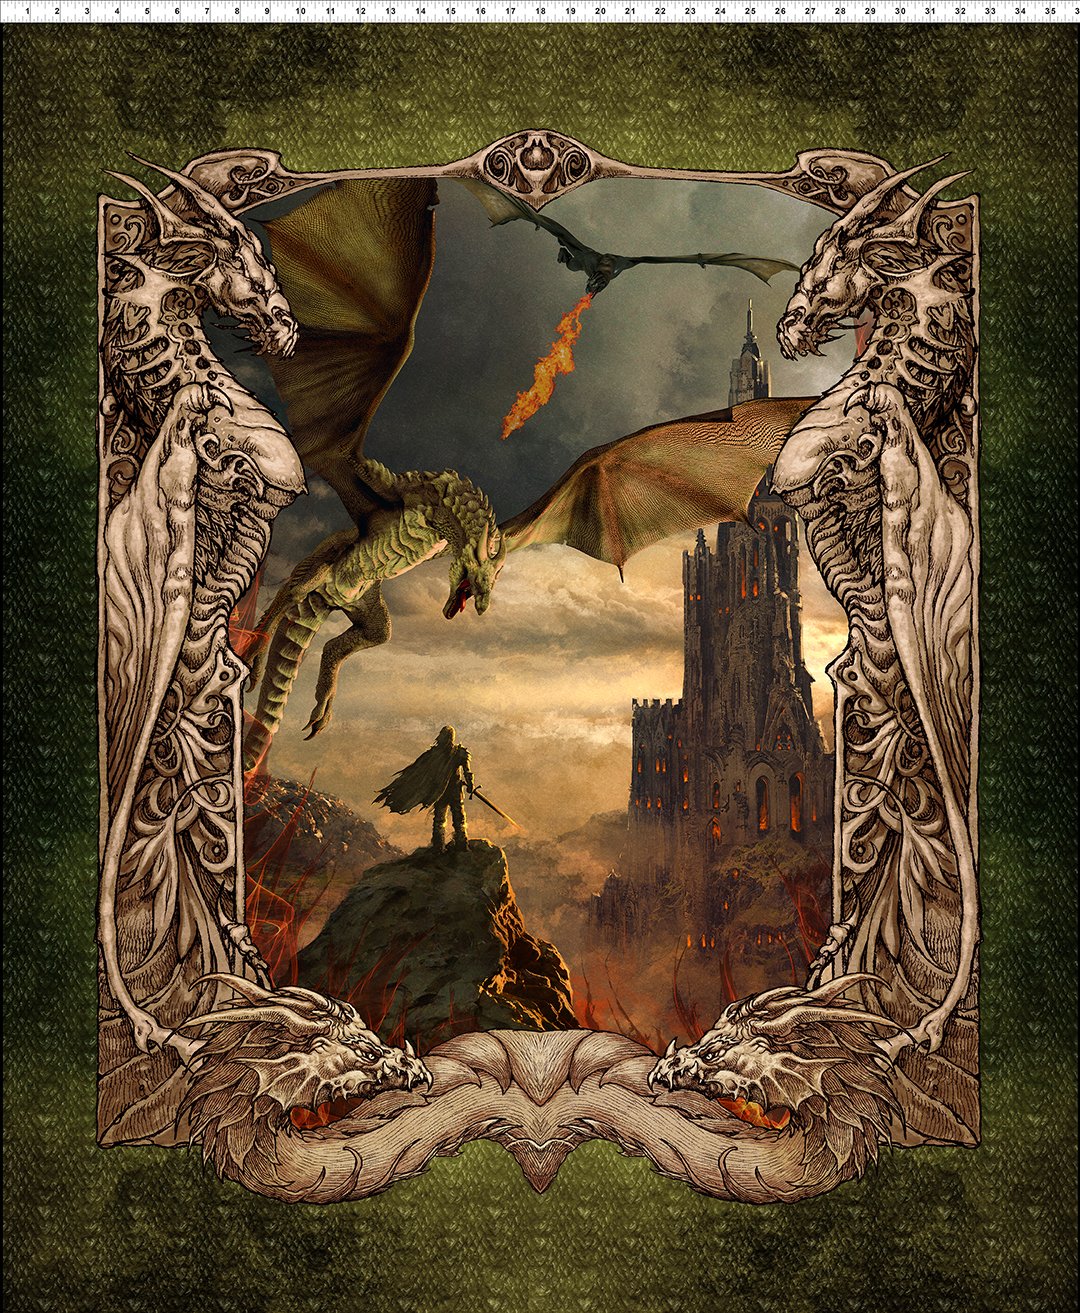 Dragons - The Ancients fabric collection by In The Beginning (Panel)